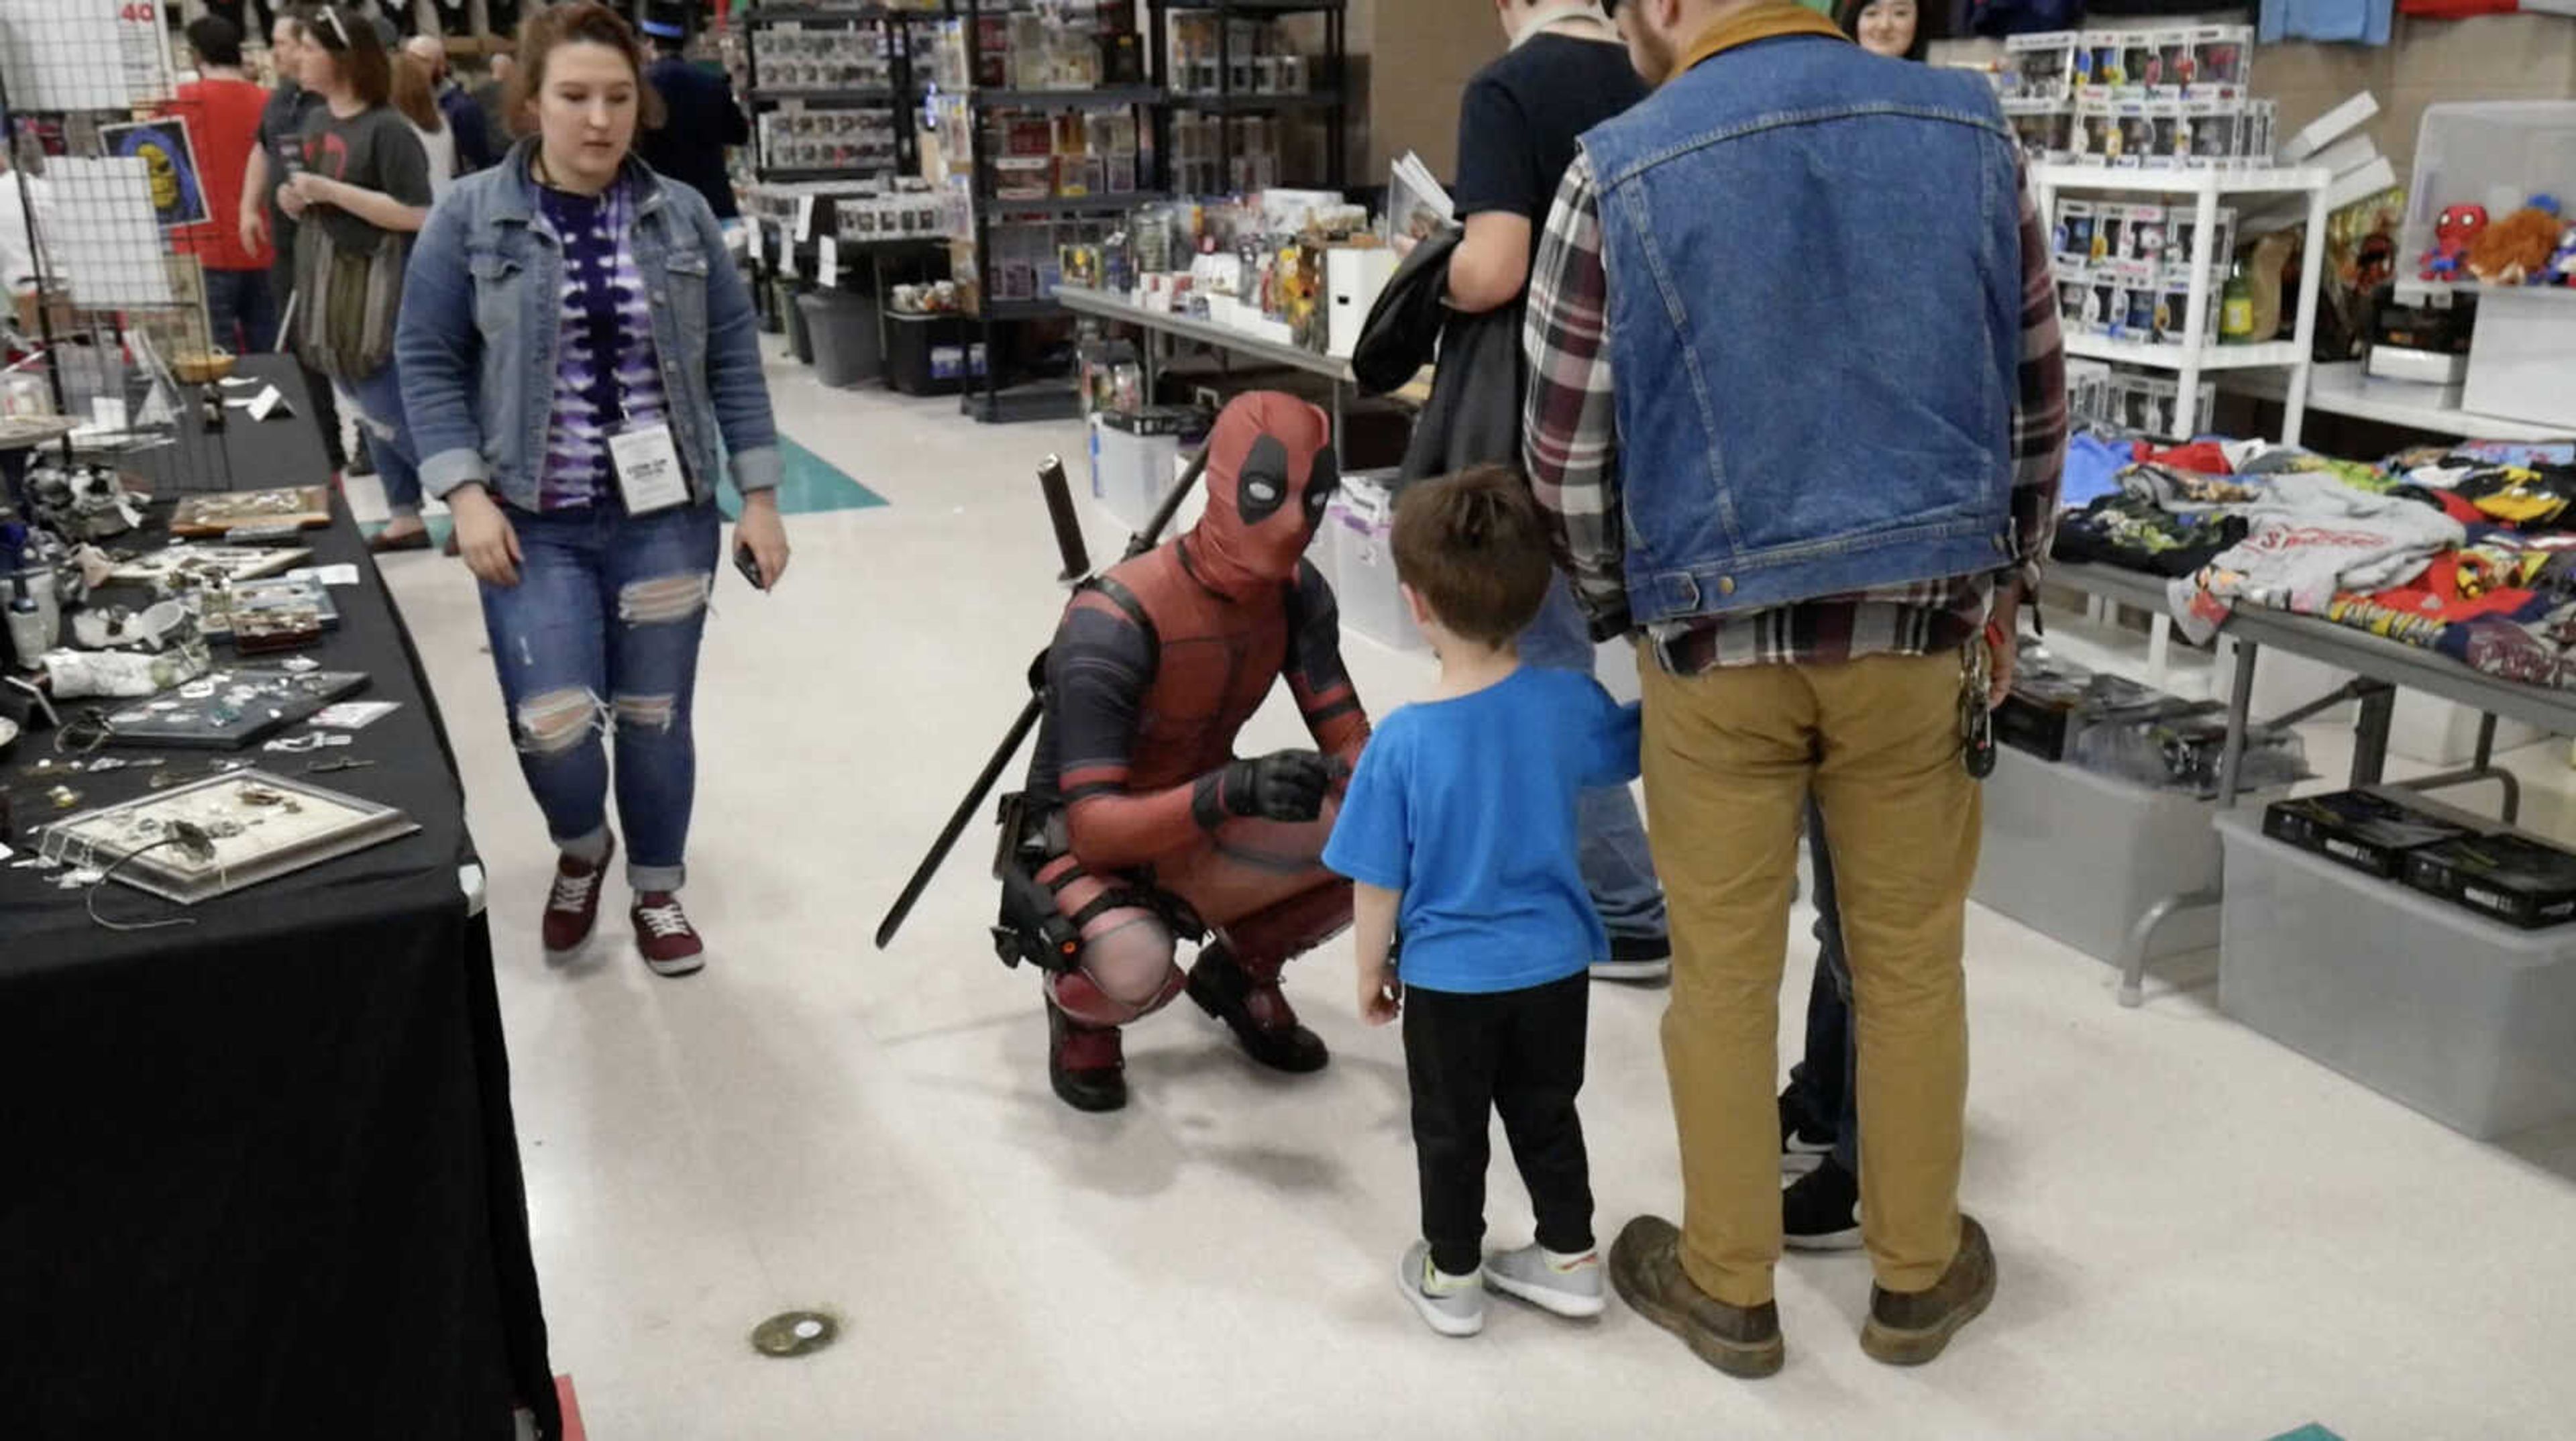 Deadpool speaks with a fan at the annual Cape Comic Con at the Osage Centre April 20.